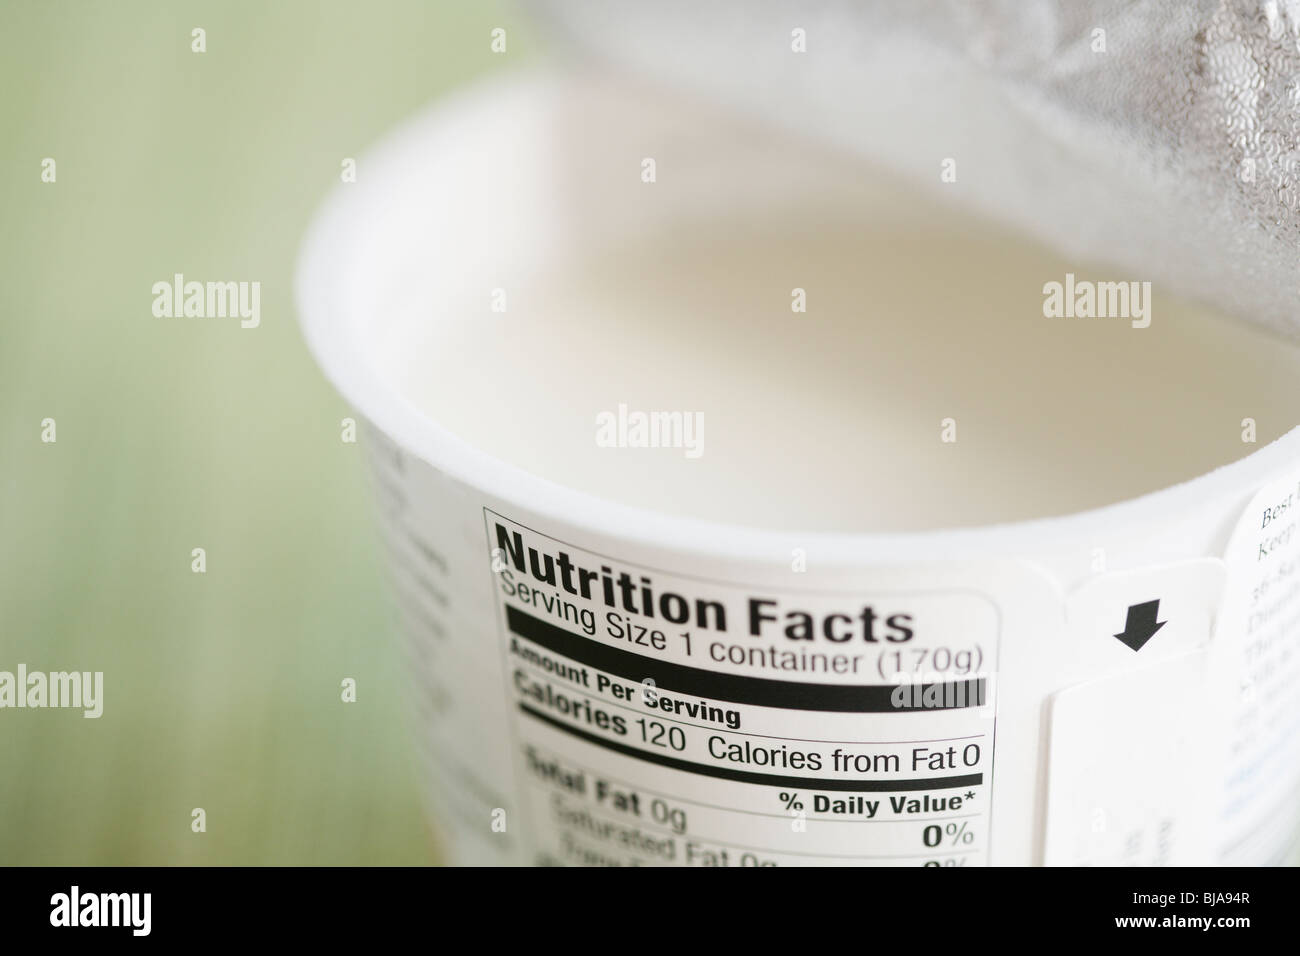 Nutrition information on yogurt container Stock Photo